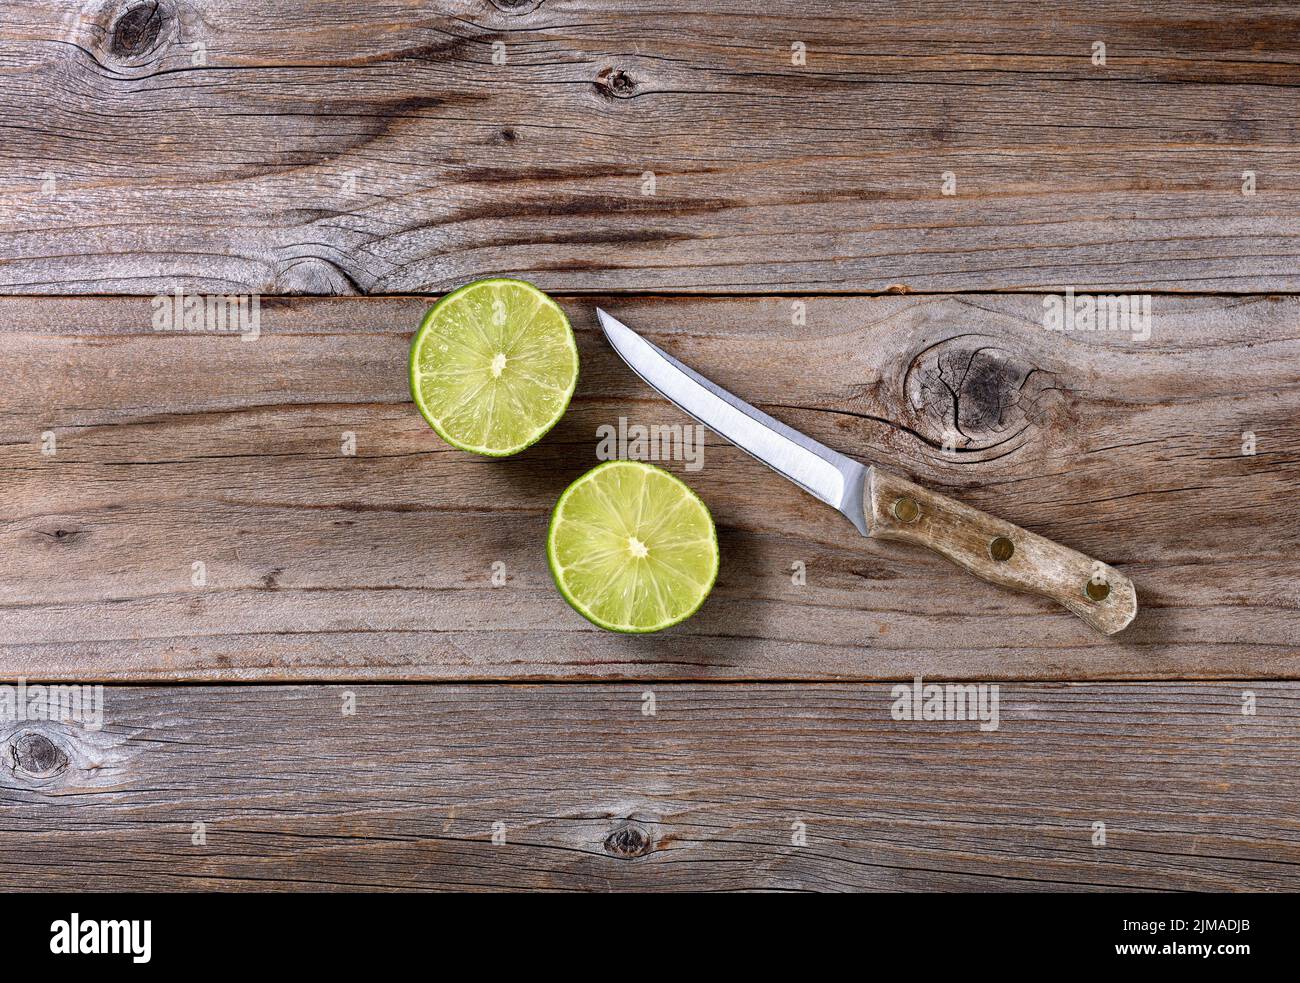 Sliced lime and paring knife on rustic wood in flat lay format Stock Photo